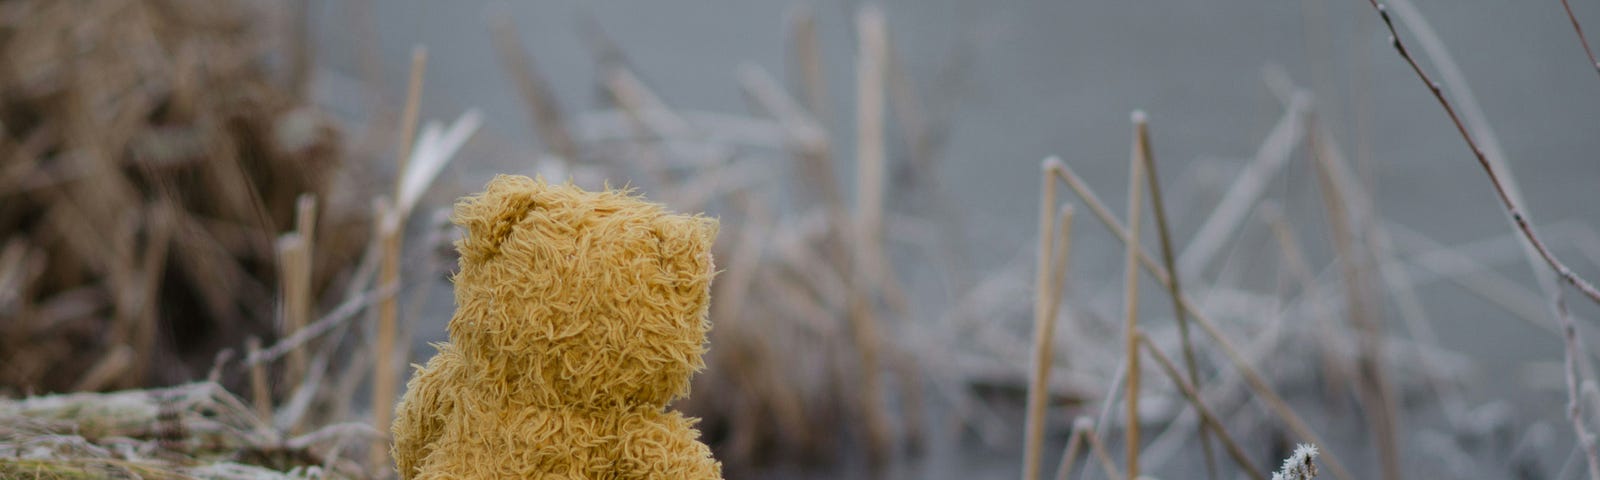 A fluffy, light-brown teddy bear sitting at the shore of a lake. It is surrounded by flat pale green and brown grass, covered by a thin layer of frost.